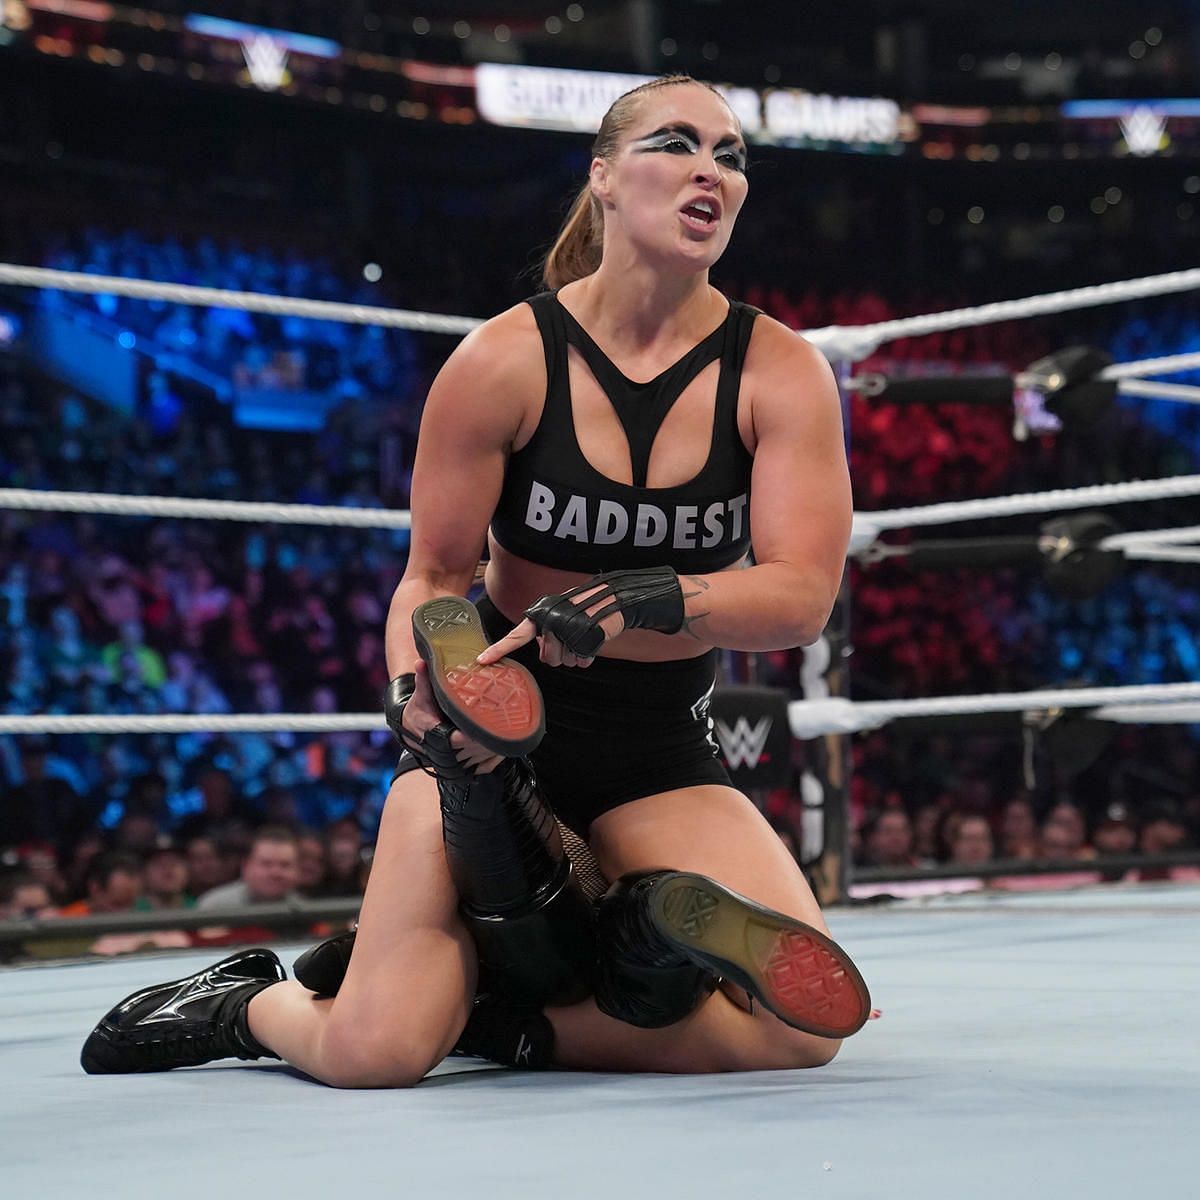 Ronda Rousey is sloppy in the ring.